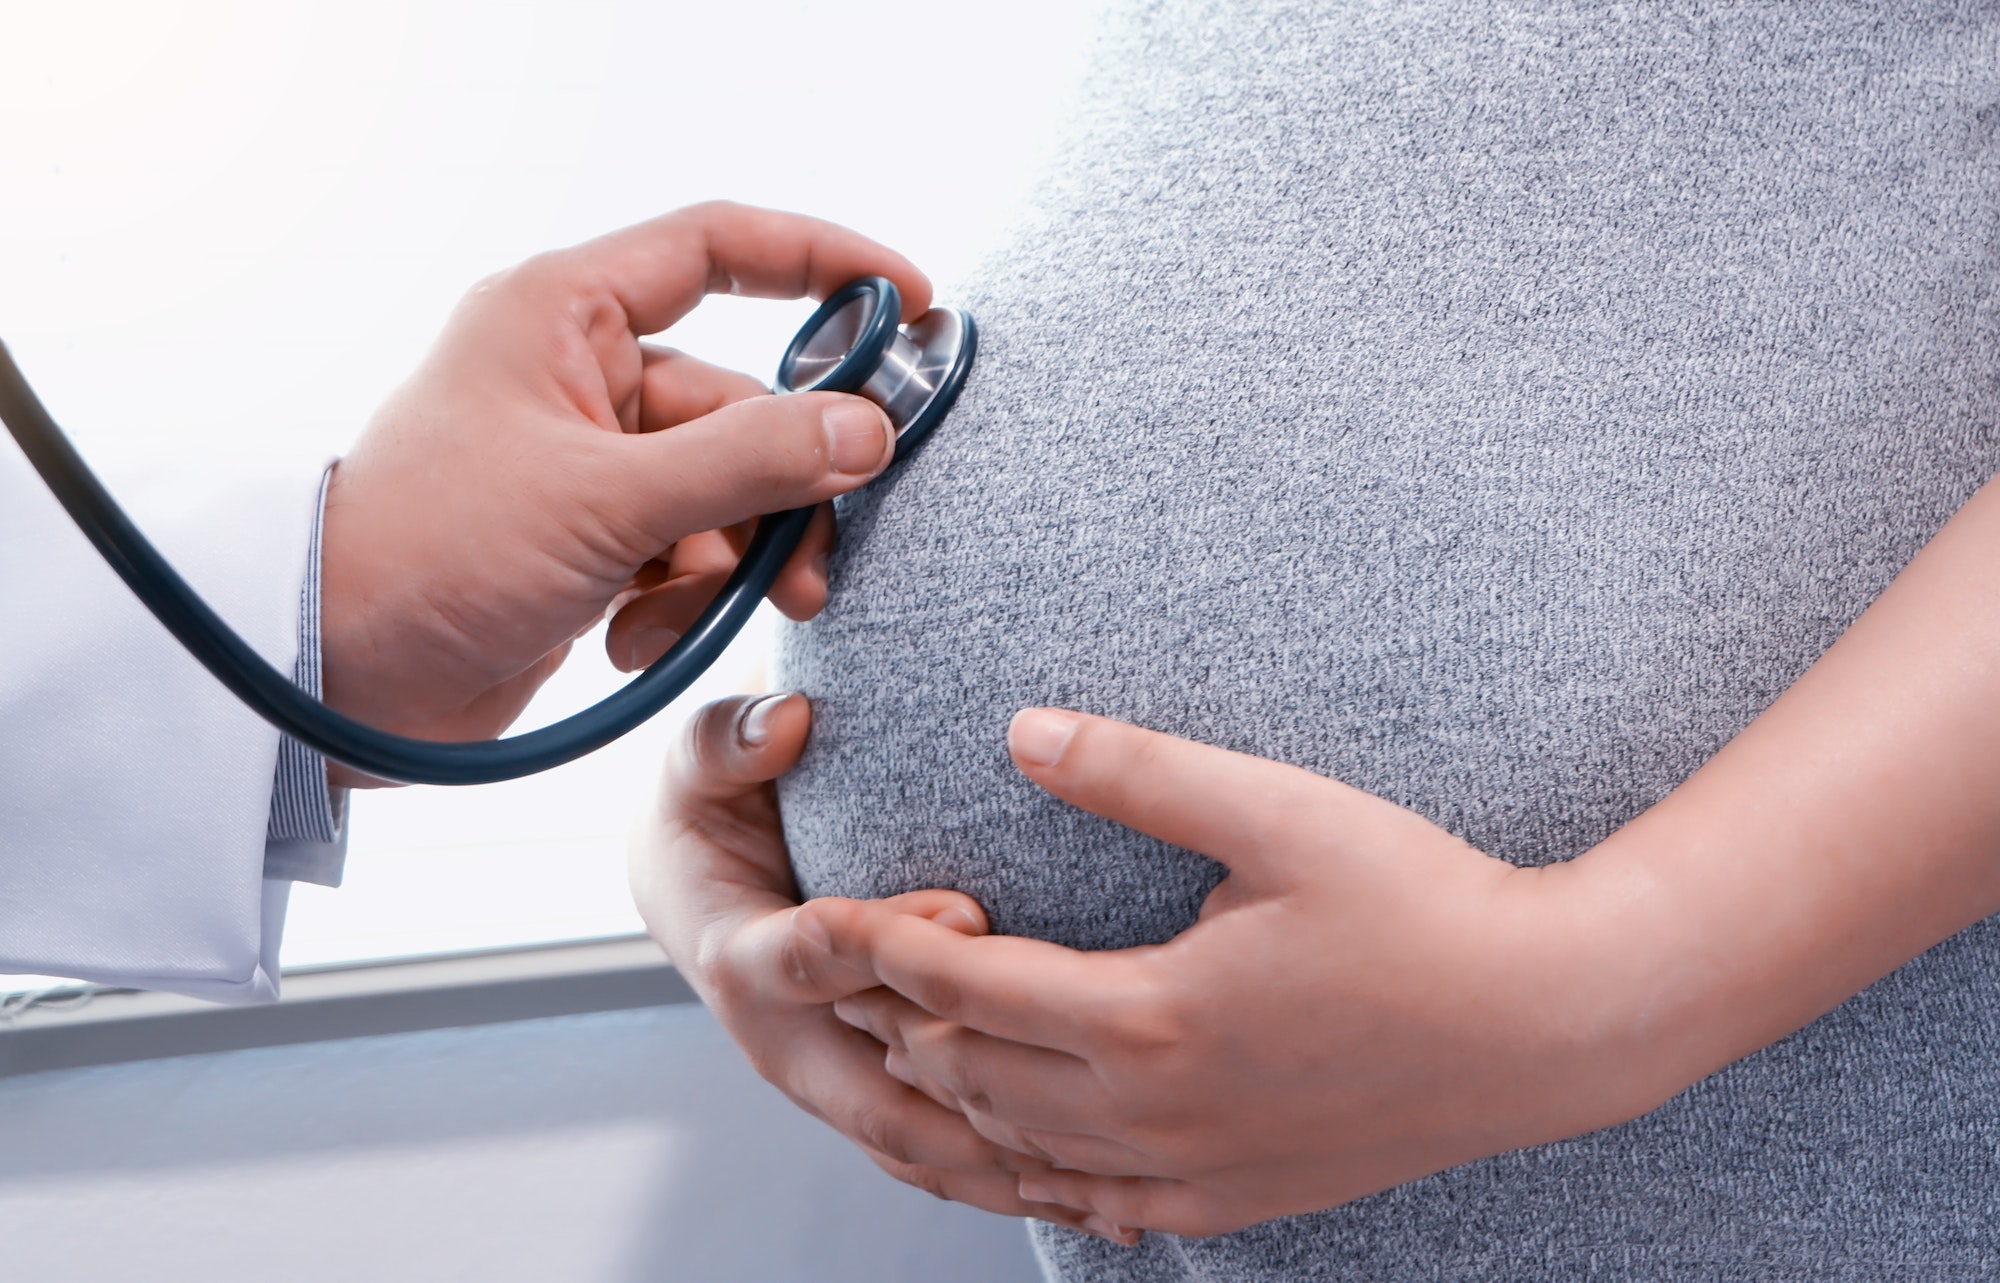 Care During Pregnancy: What You Need to Know